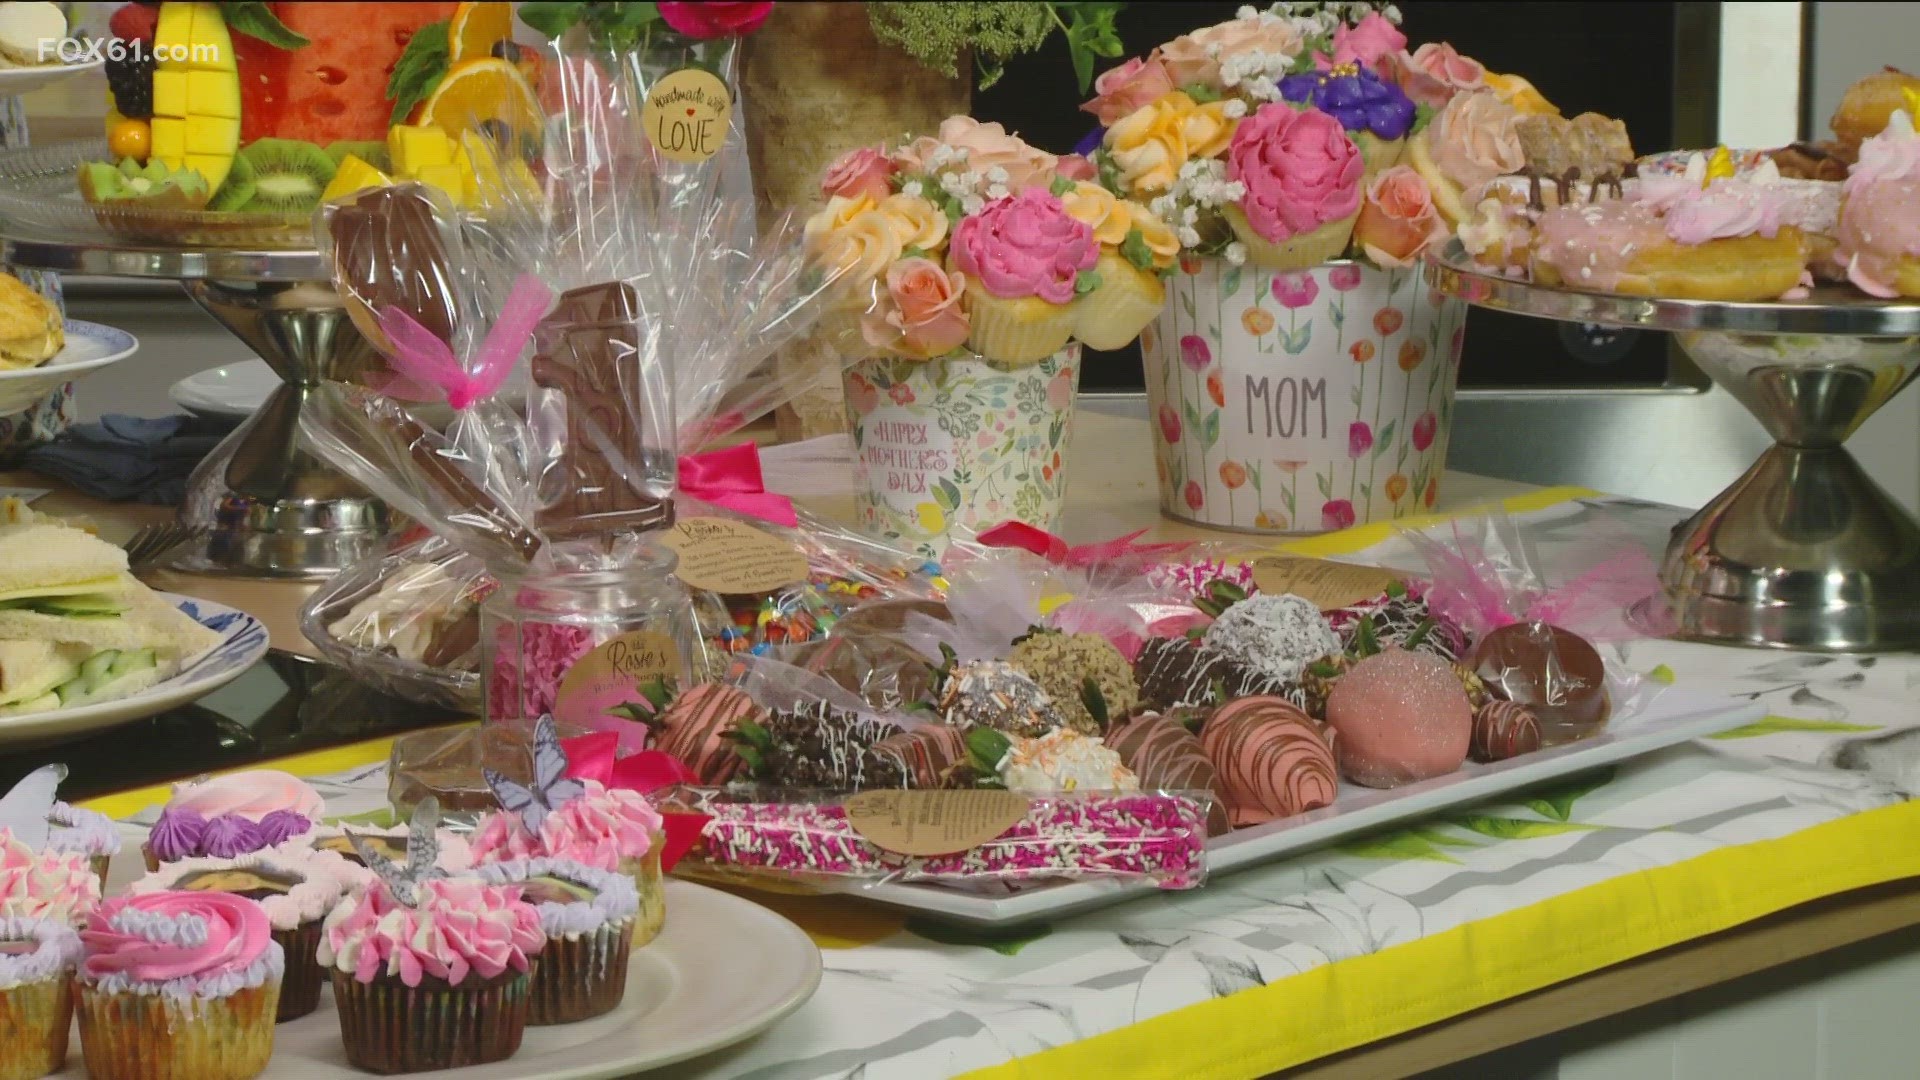 From flowers to baked goods, Yelp has recommendations on where to find mother's day gifts from Connecticut's local businesses.